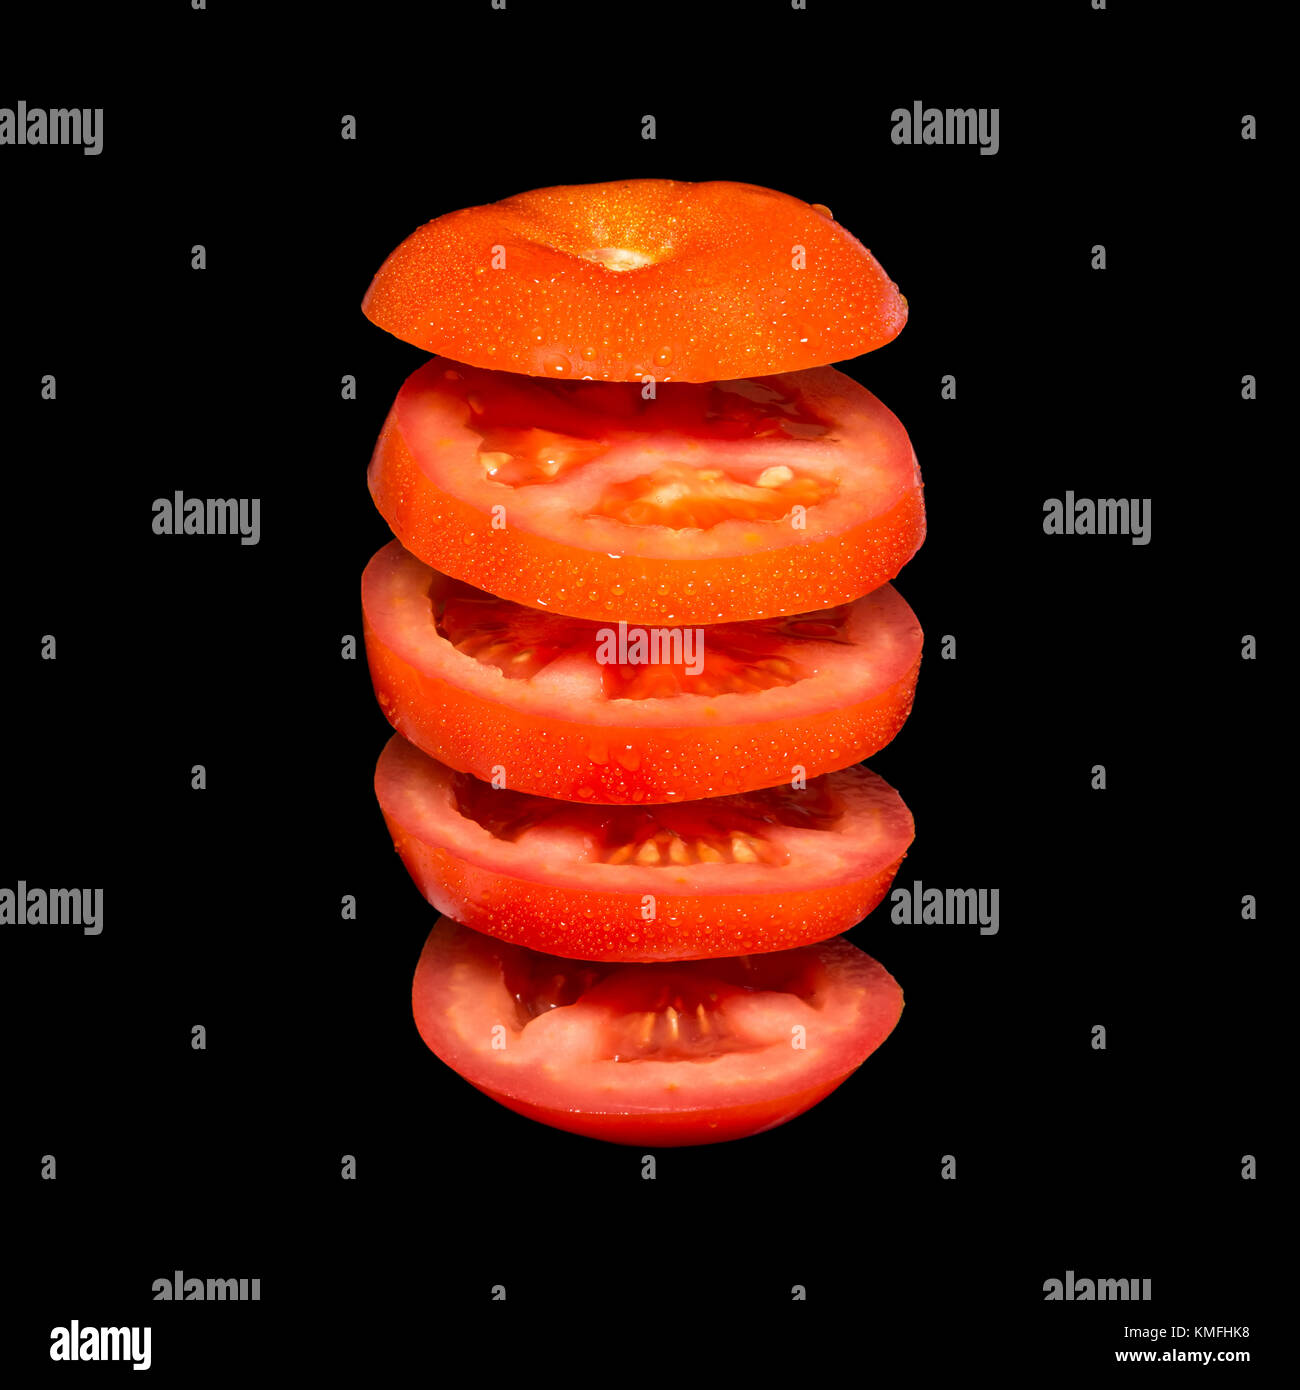 Creative concept with flying tomato. Sliced red tomato isolated on black background. Levity vegetable floating in the air. Stock Photo